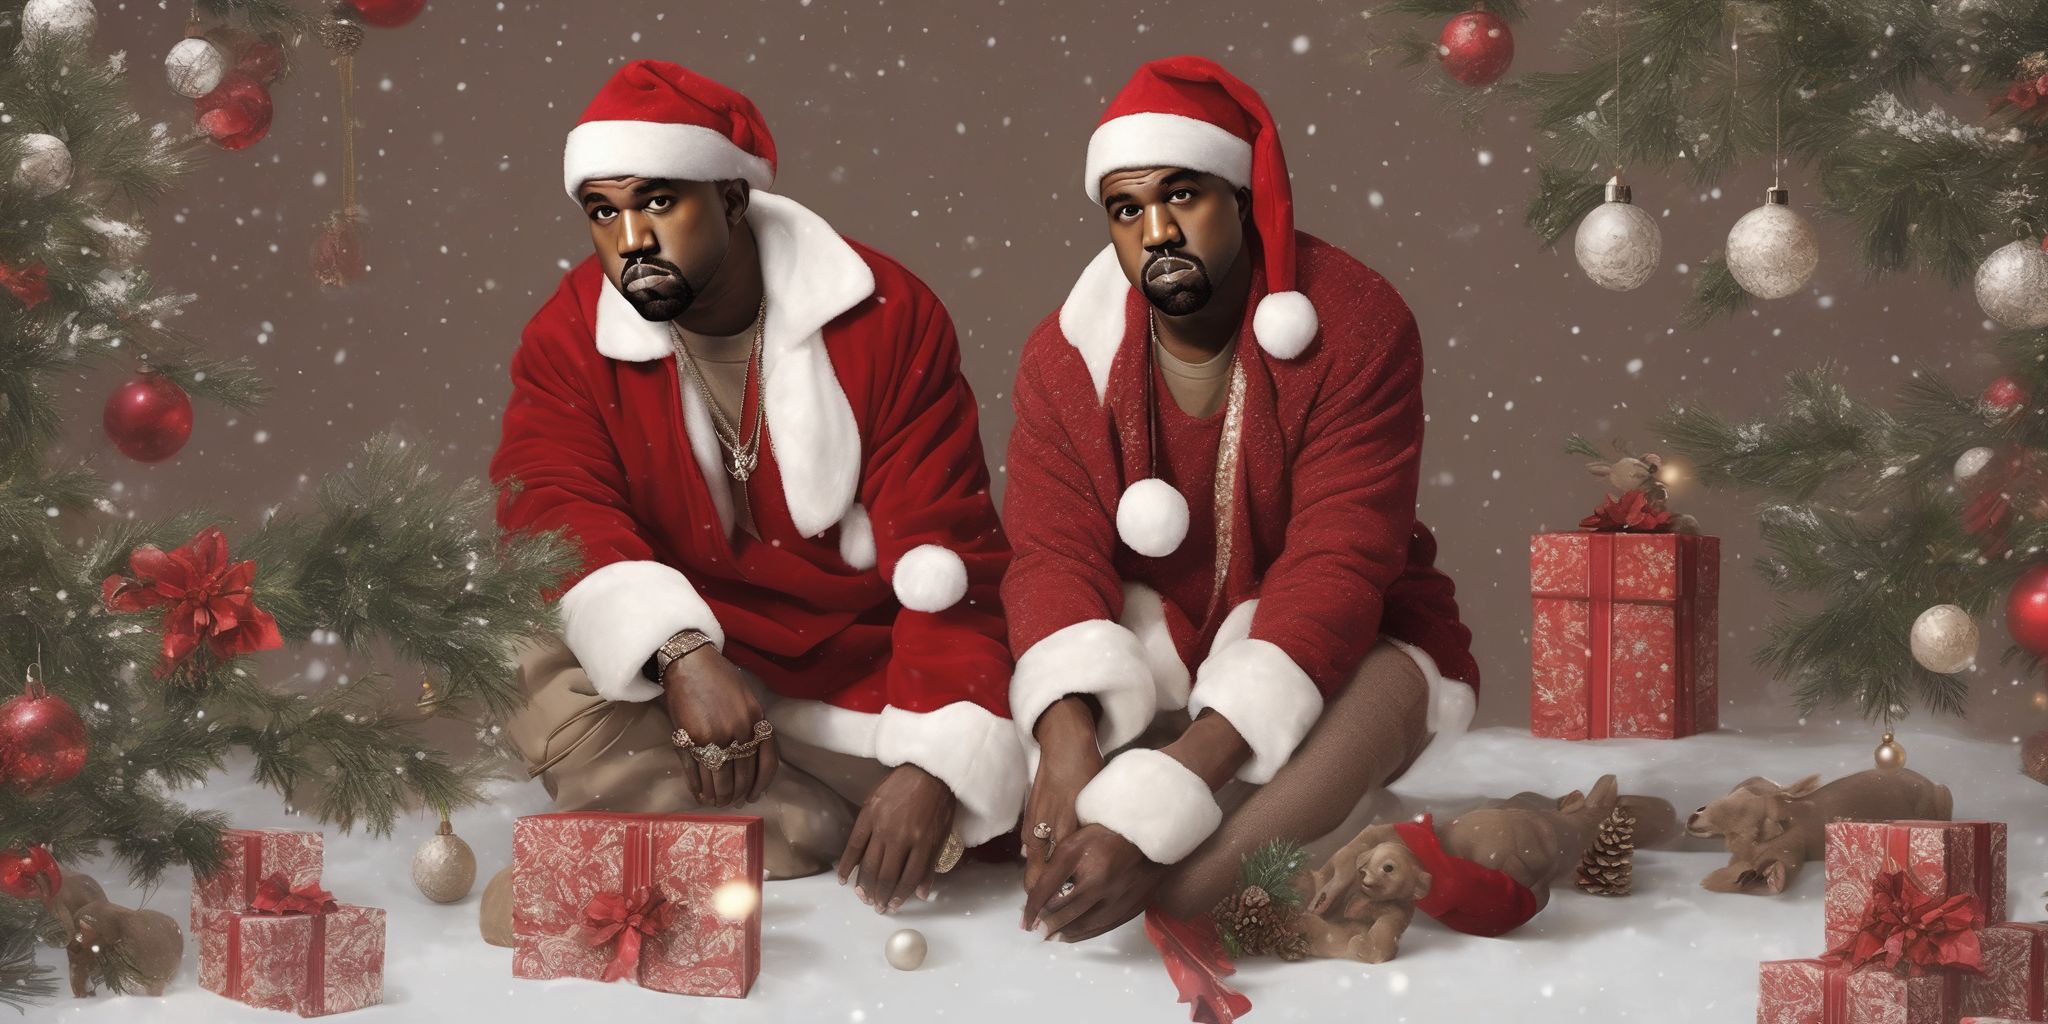 Kanye in realistic Christmas style